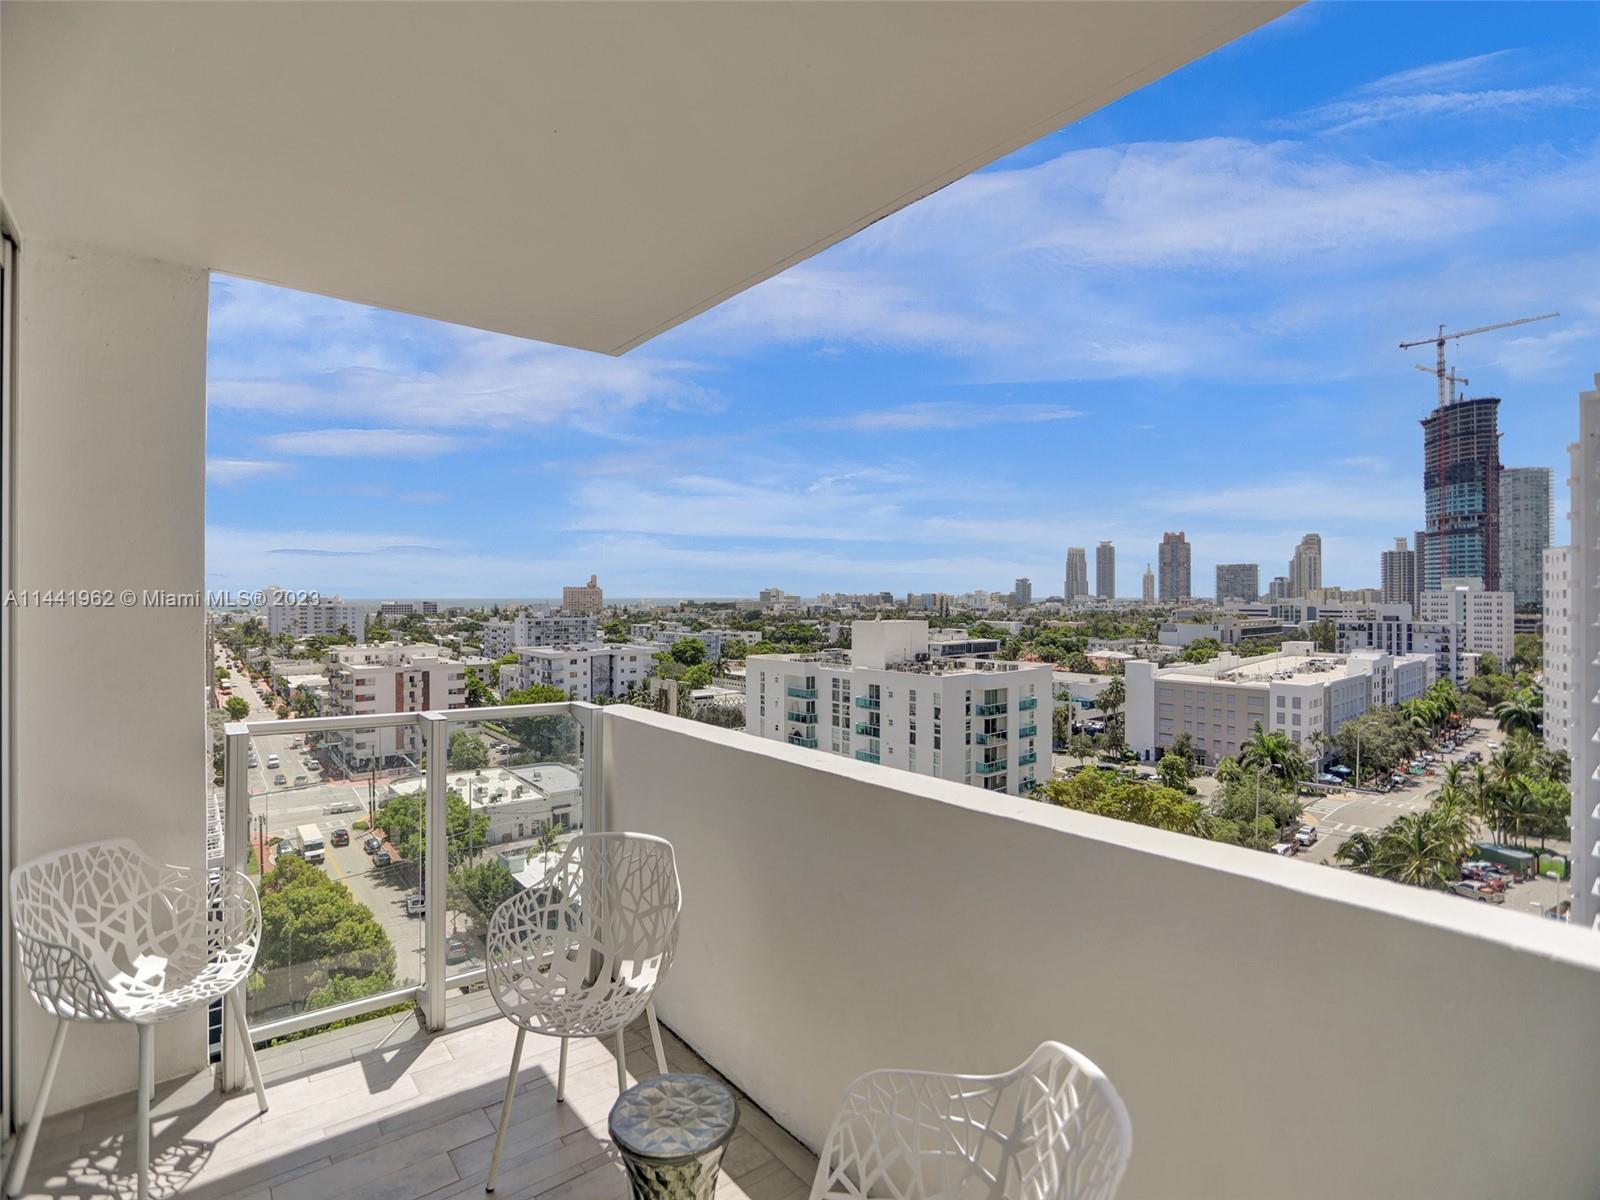 AMAZING OPPORTUNITY FOR INVESTORS TO USE AS AN INCOME PROPERTY OR VACATION HOME AT THE MONDRIAN SOUTH BEACH HOTEL!  TURNKEY CORNER UNIT WITH BALCONY. 1 BEDROOM / 1 BATHROOM. CAN BE RENTED FREELY. DAILY RENTAL ALLOWED. RARE AIRBNB APPROVED. MONDRIAN OFFERS SPECTACULAR AMENITIES: 2 POOLS OVERLOOKING BISCAYNE BAY, SPA, BAY FRONT GYM, INDOOR-OUTDOOR BAR AND BAIA BEACH CLUB. 24-HR ROOM SERVICE. WALKING DISTANCE TO THE BEACH, WHOLE FOODS, SHOPS AND RESTAURANTS. 1 FREE VALET PARKING.